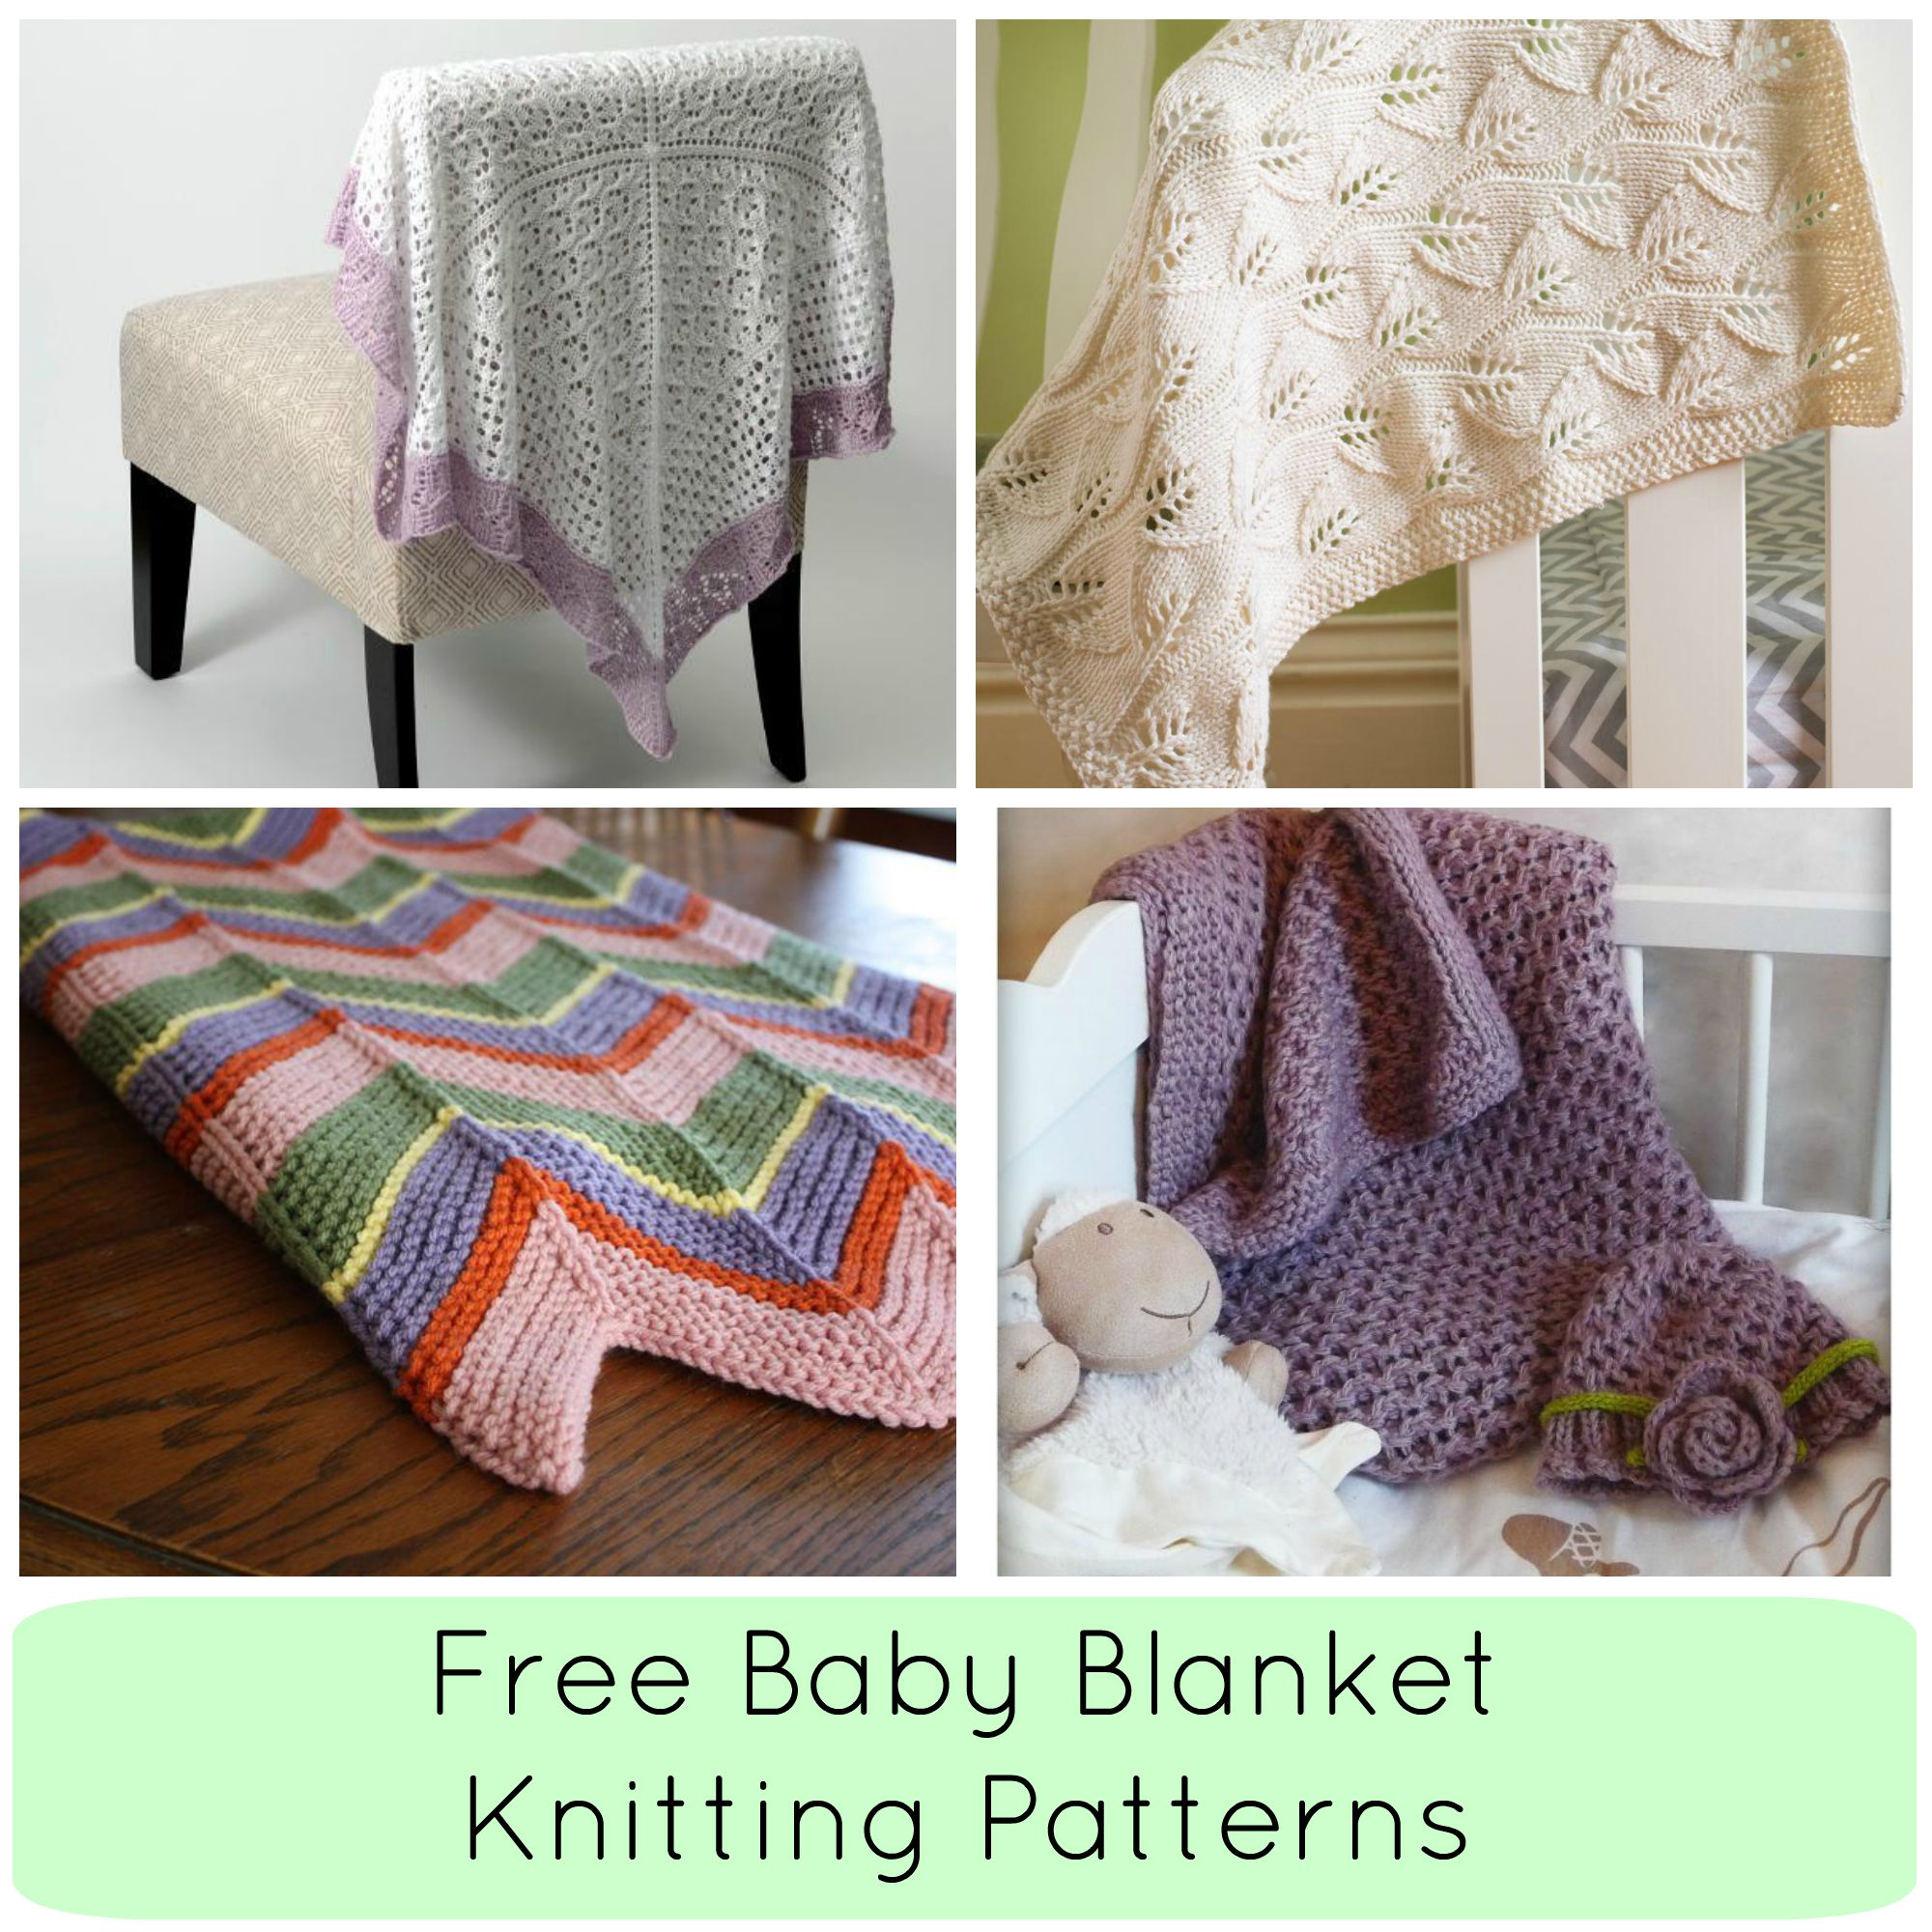 Knitting Patterns For Baby Blankets Free 8 Free Ba Blanket Knitting Patterns Craftsy